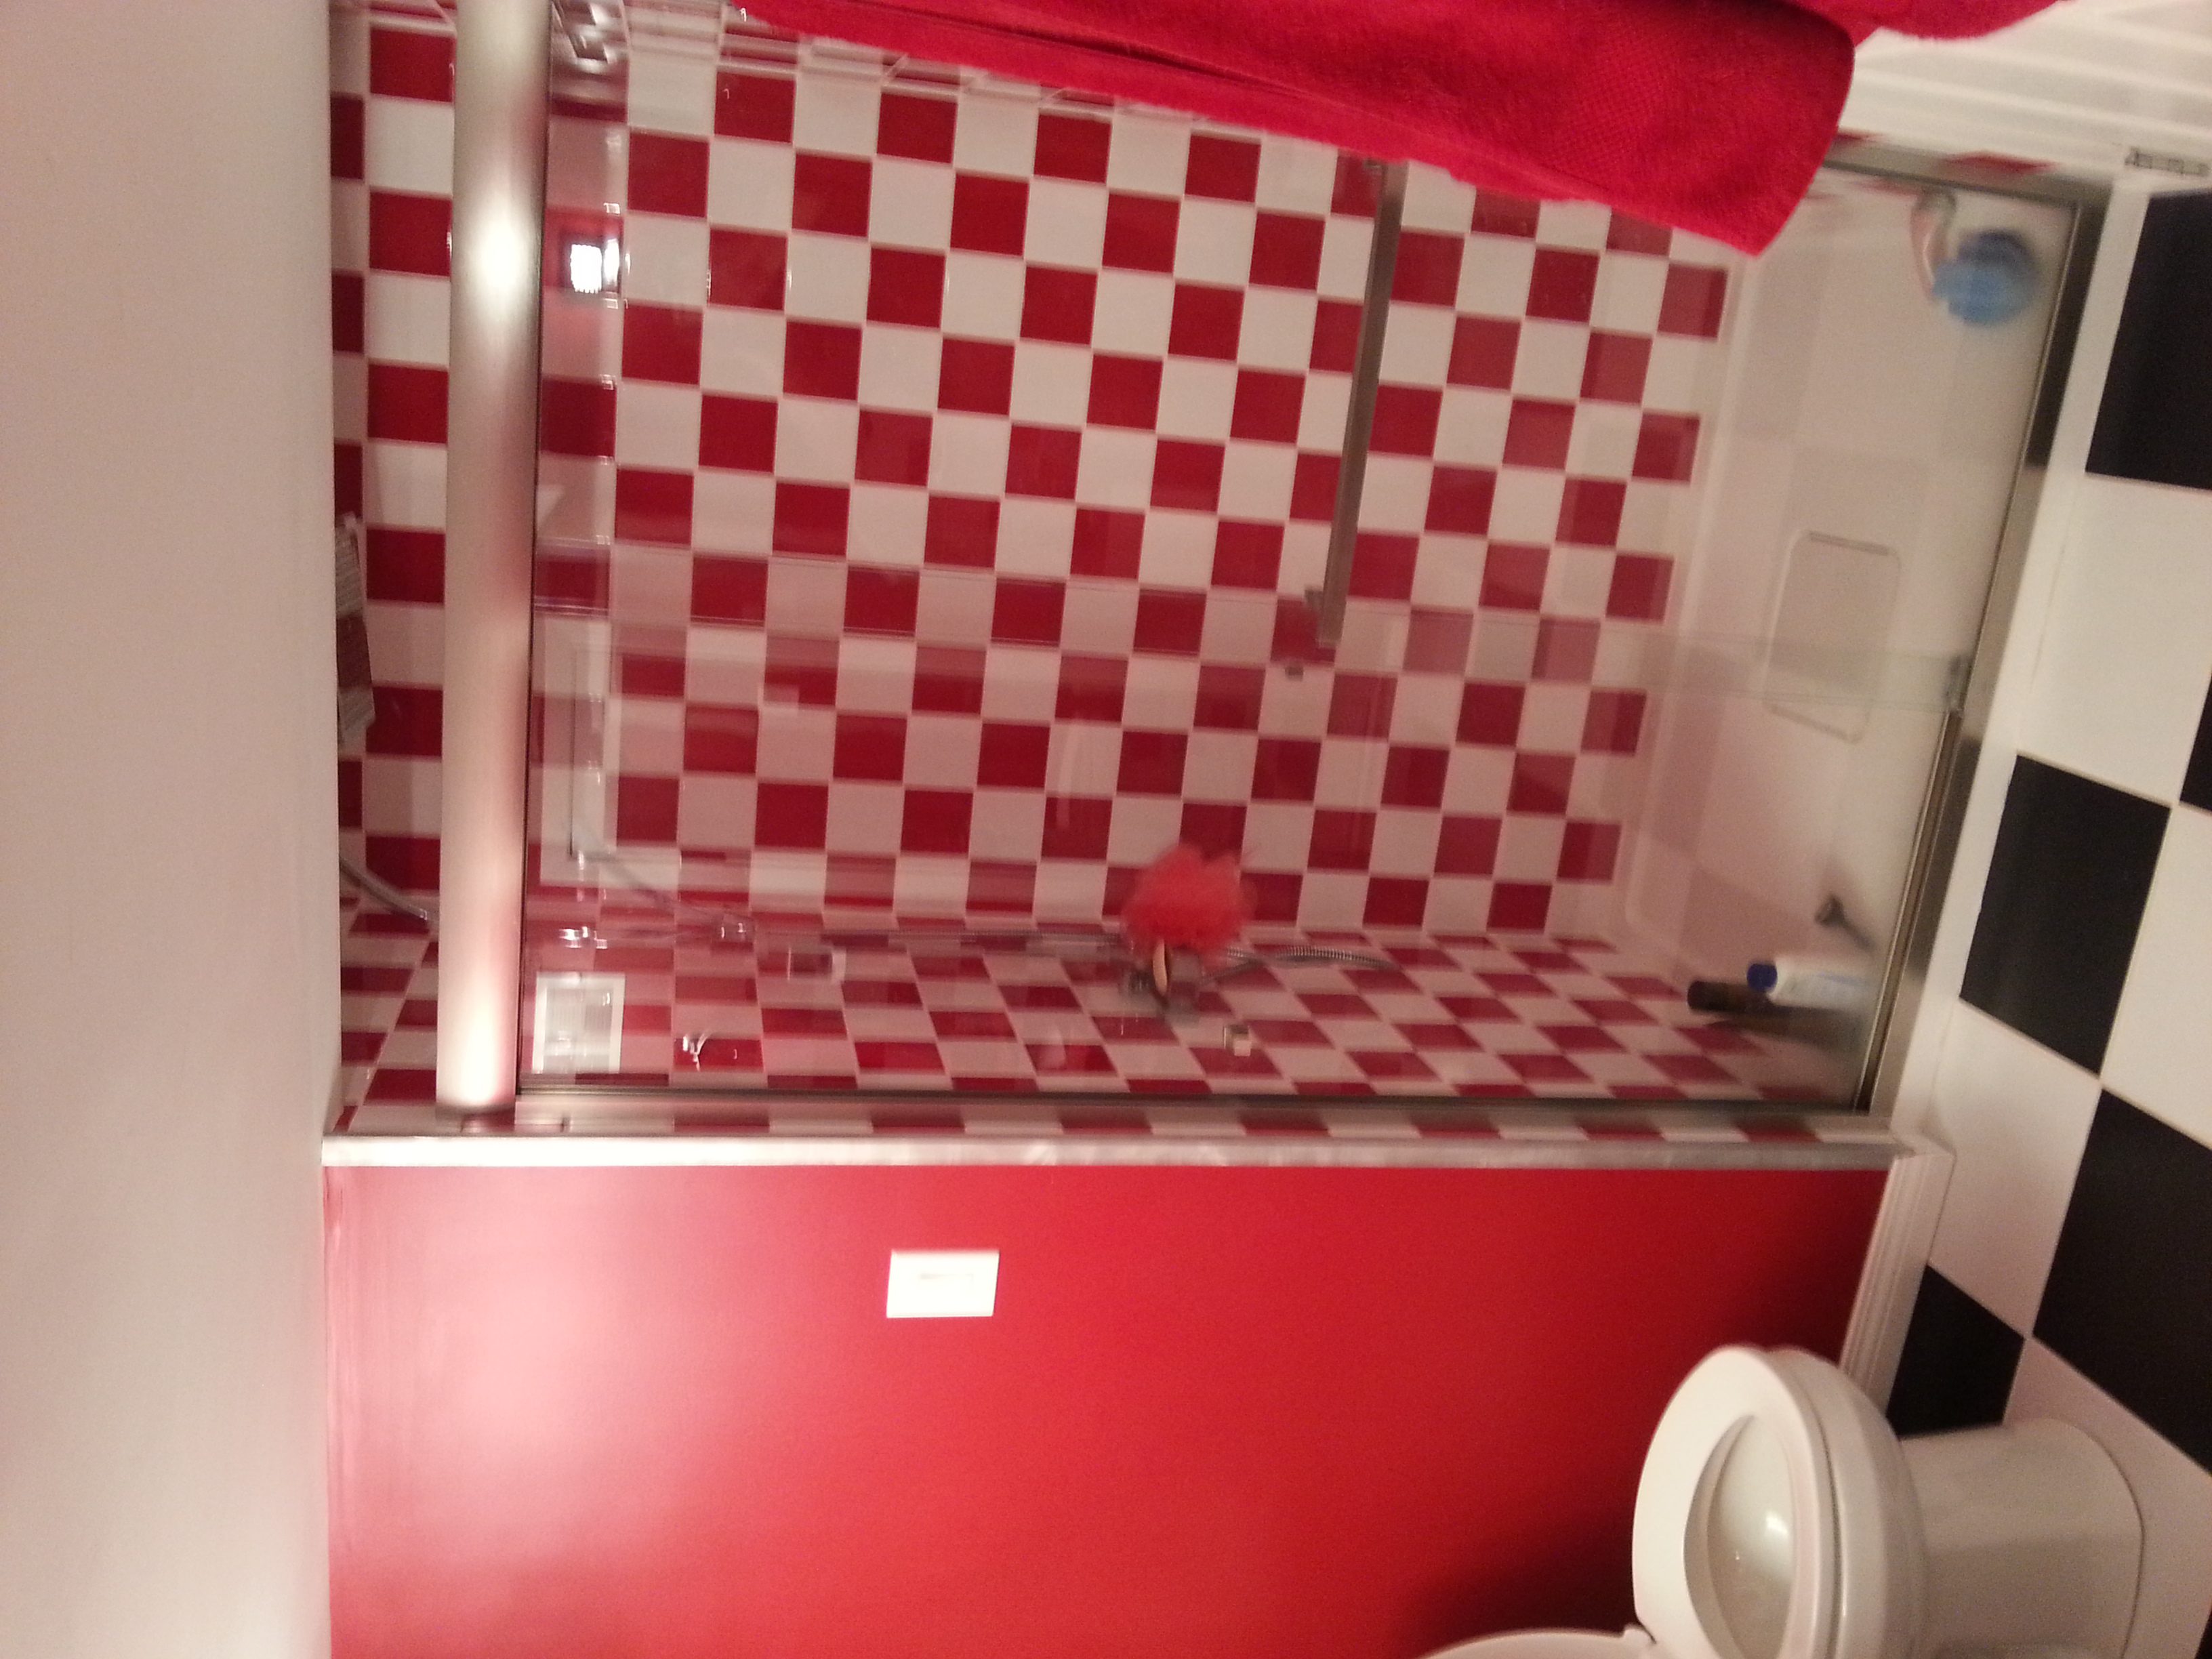 Shower for a 50\'s themed bathroom renovation